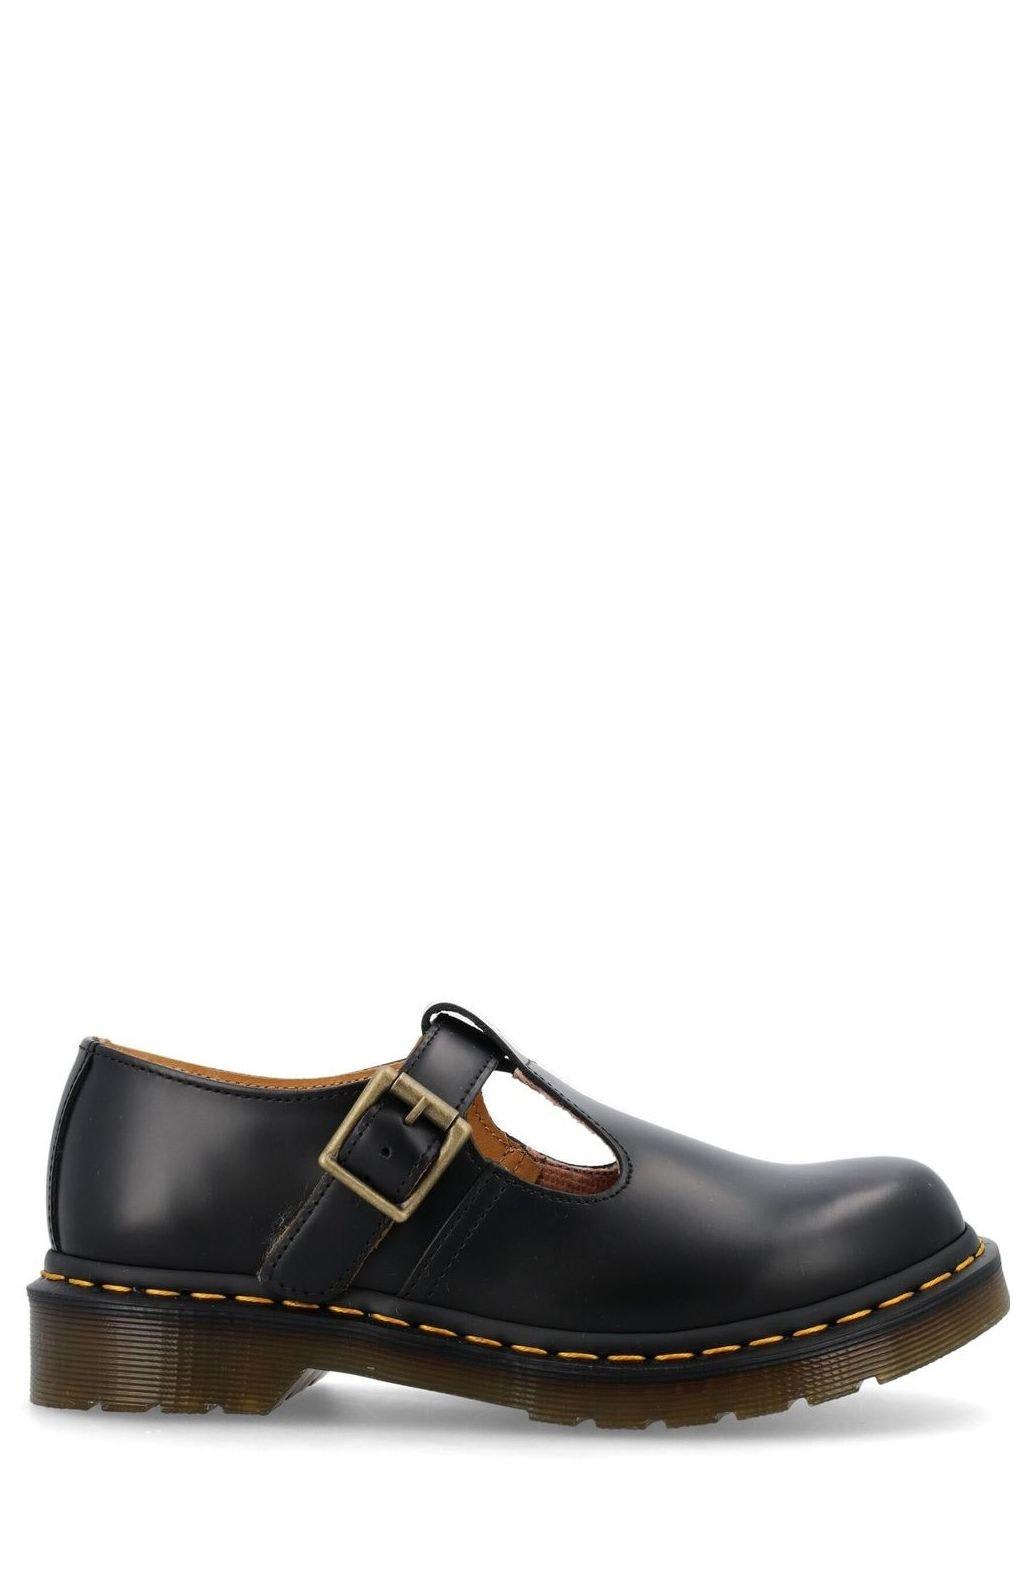 DR. MARTENS' POLLEY MARY JANE FLAT SHOES